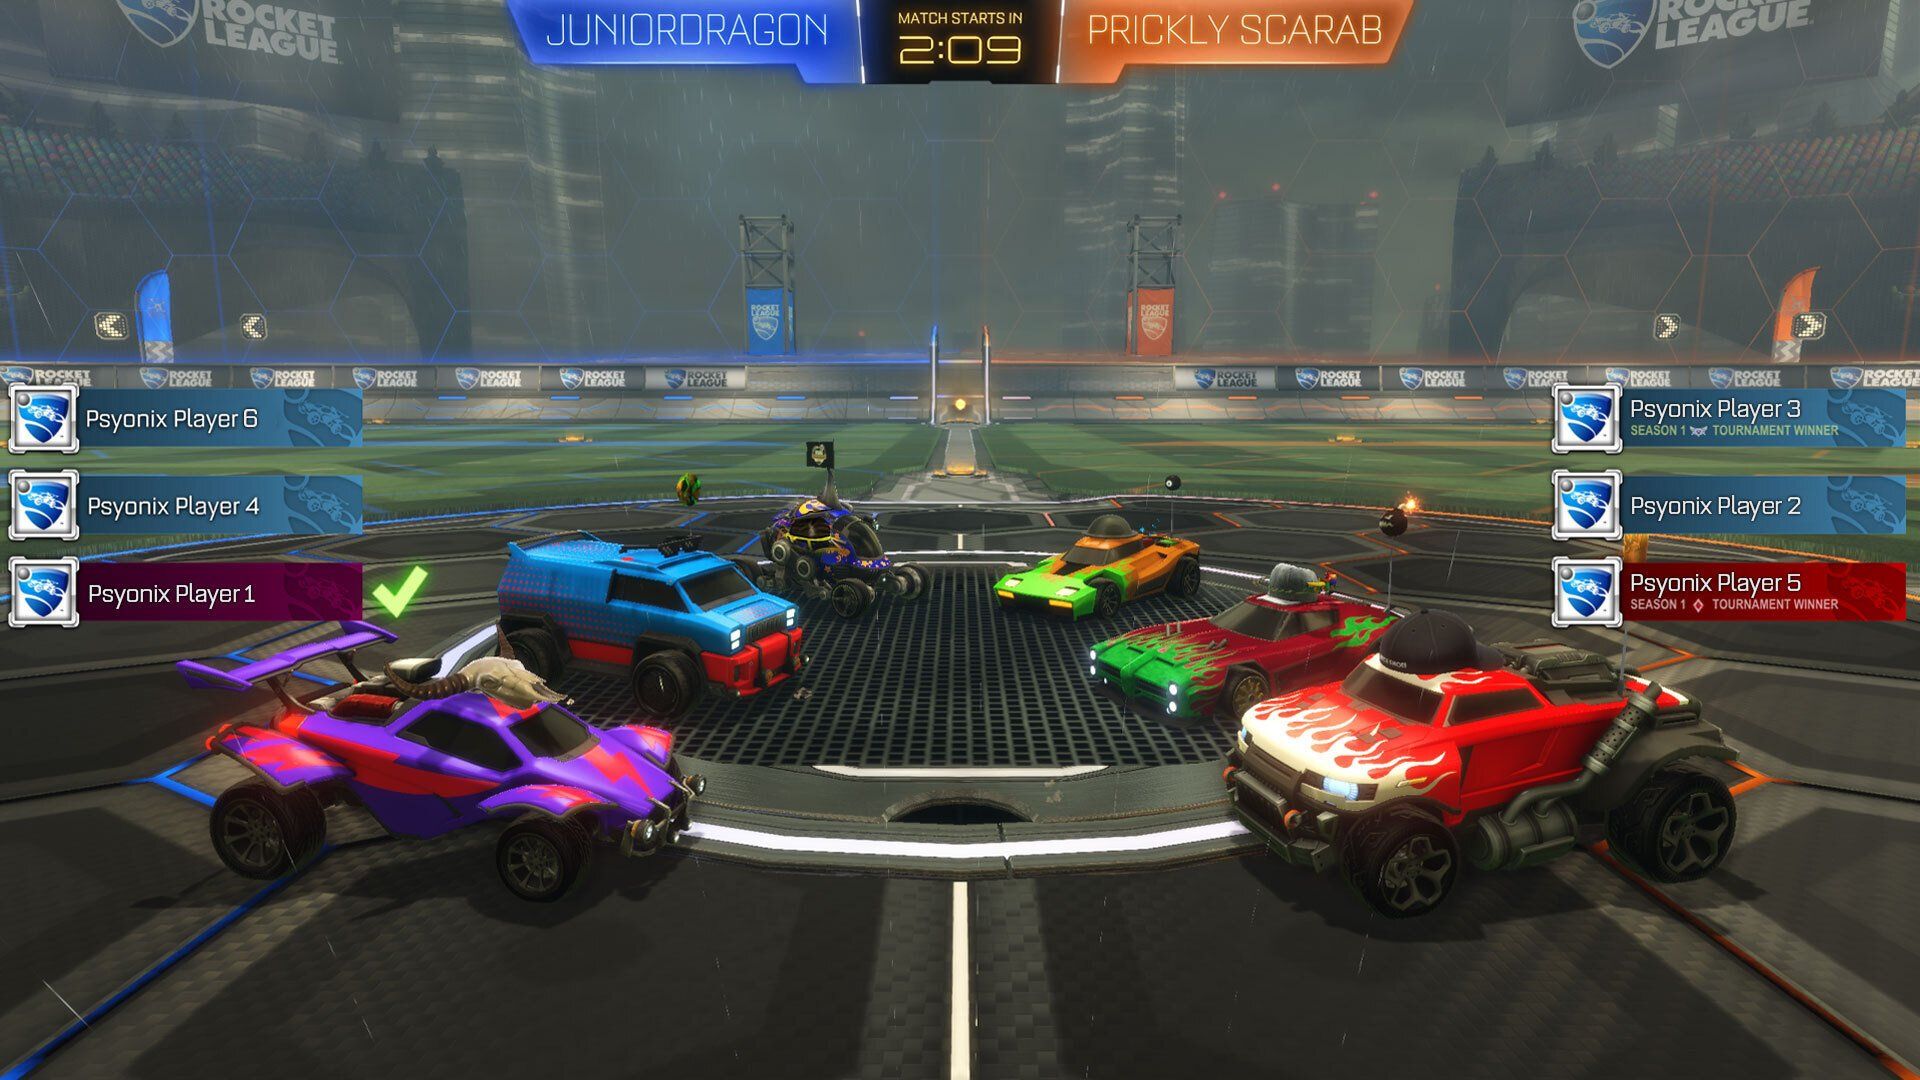 Rocket League's Tournaments Are Getting An Overhaul When The Game Goes Free To Play